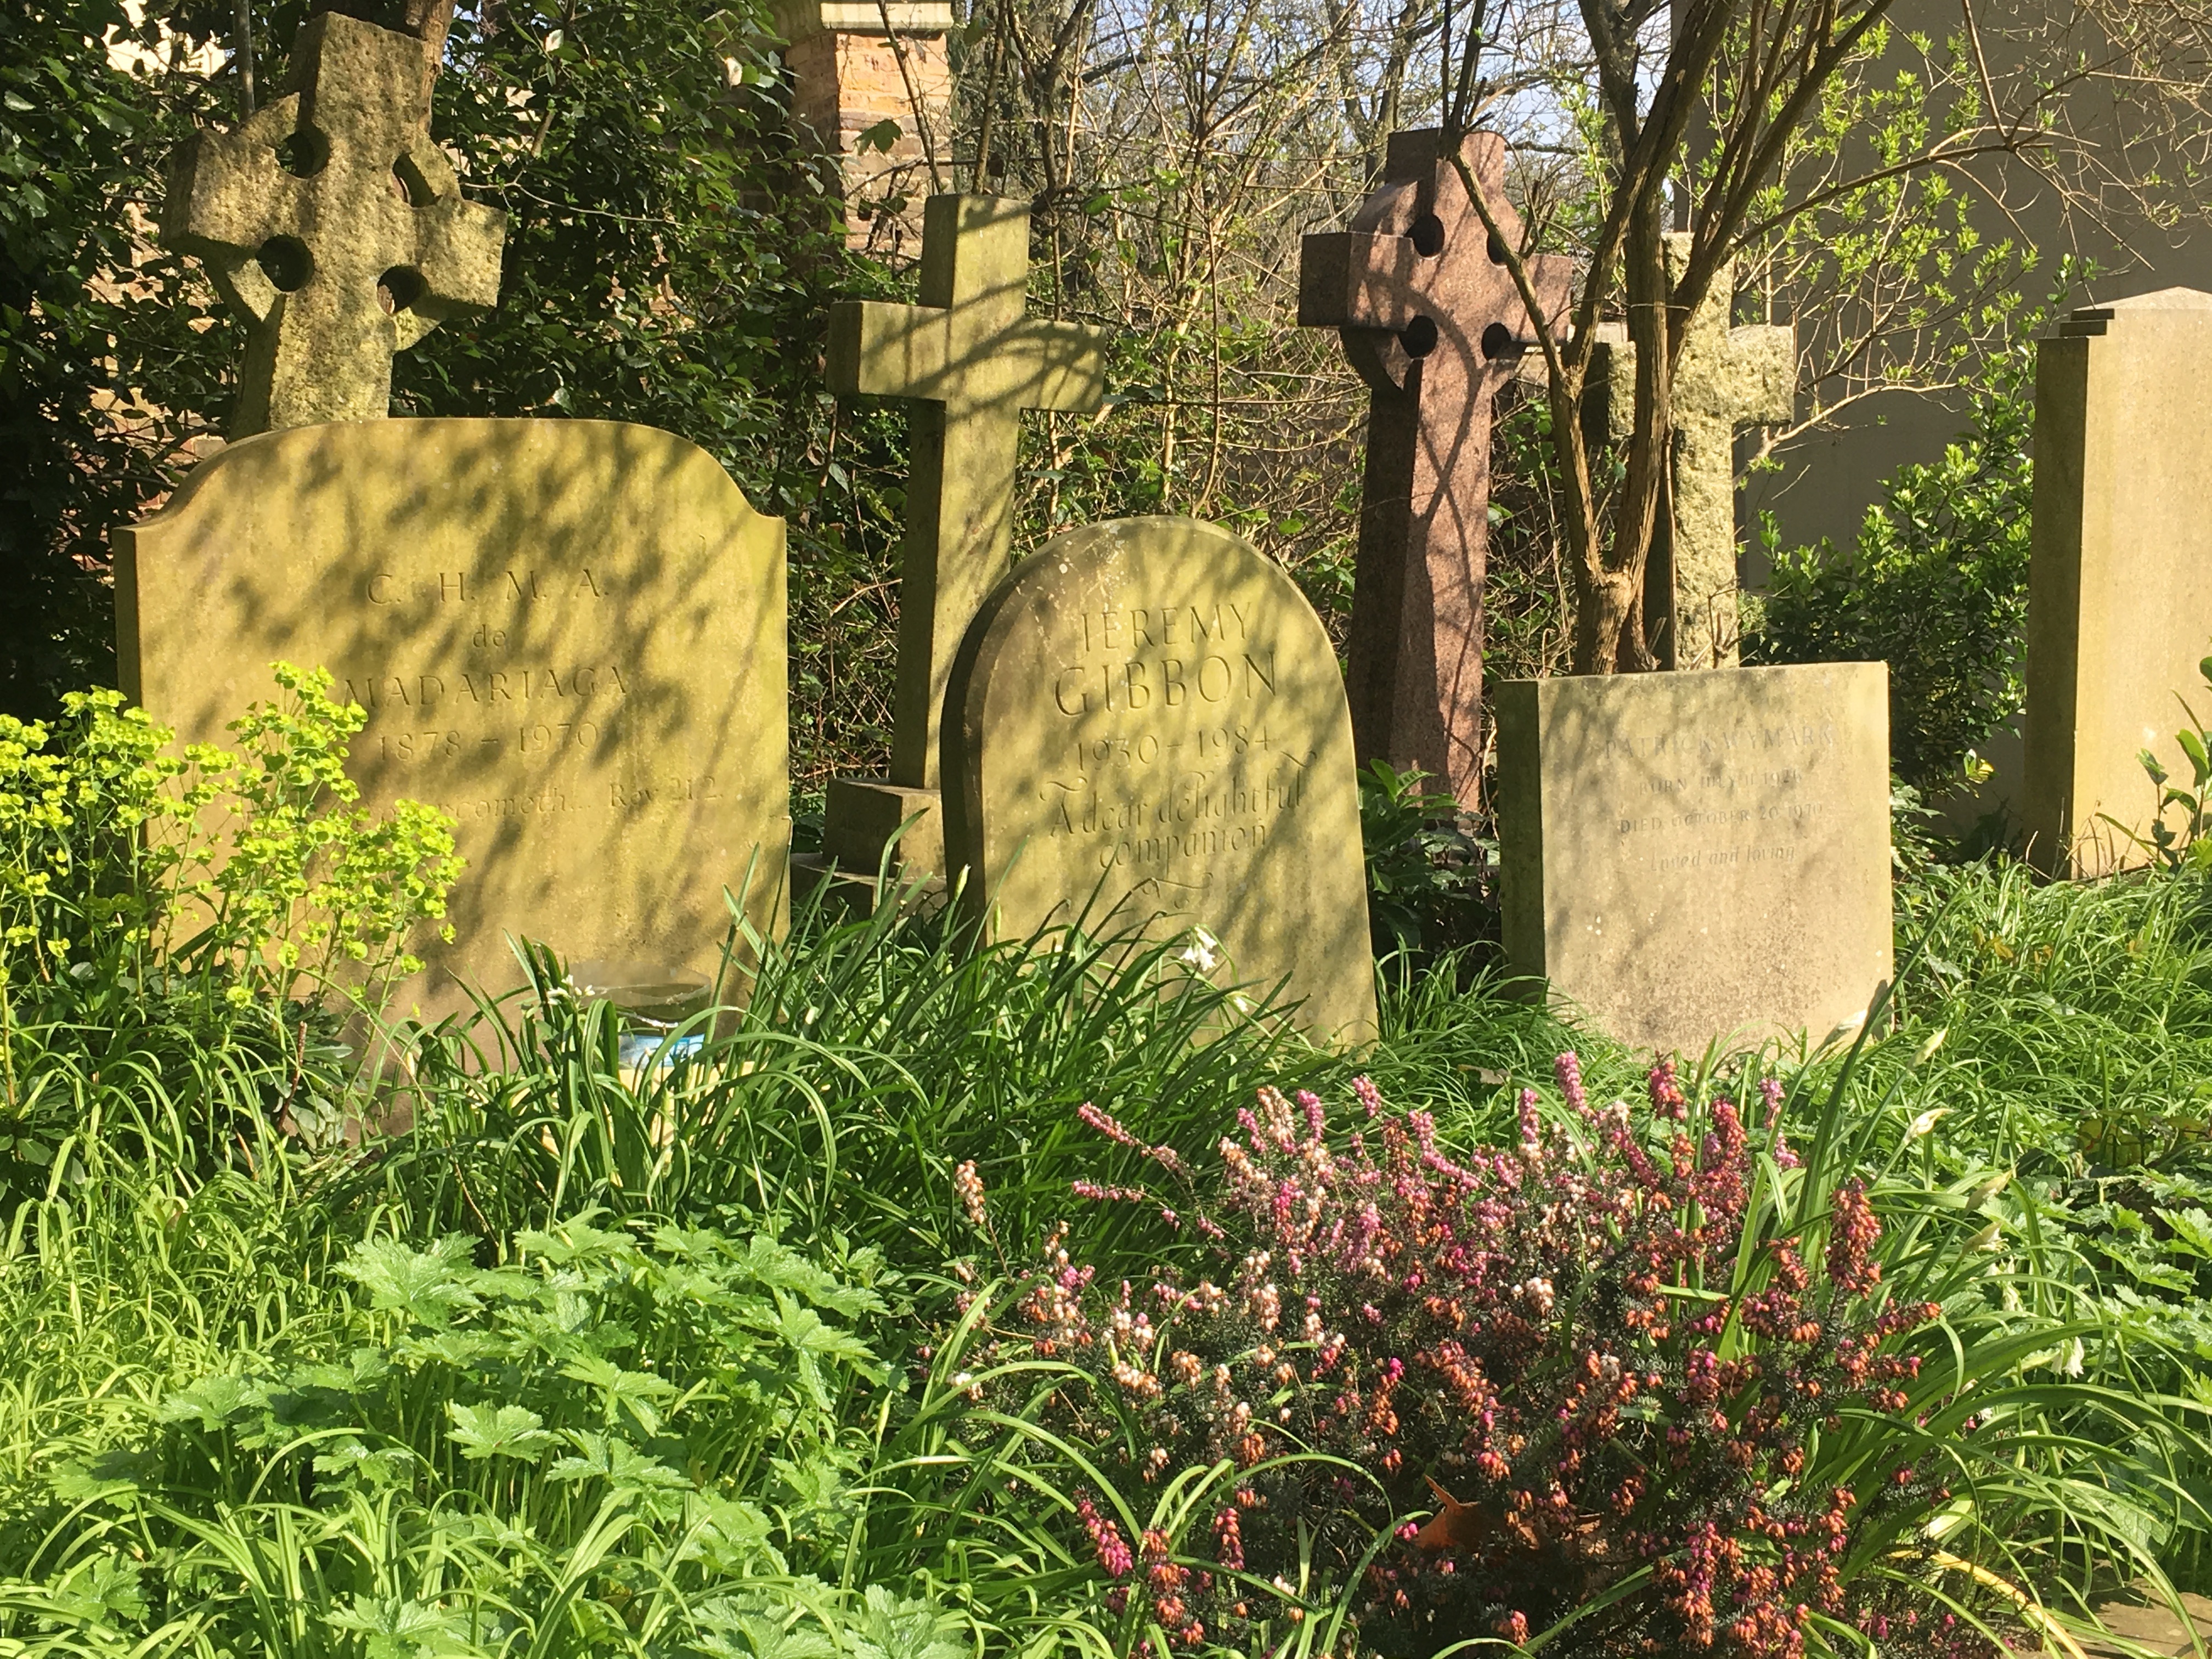 the turnkey of highgate cemetery